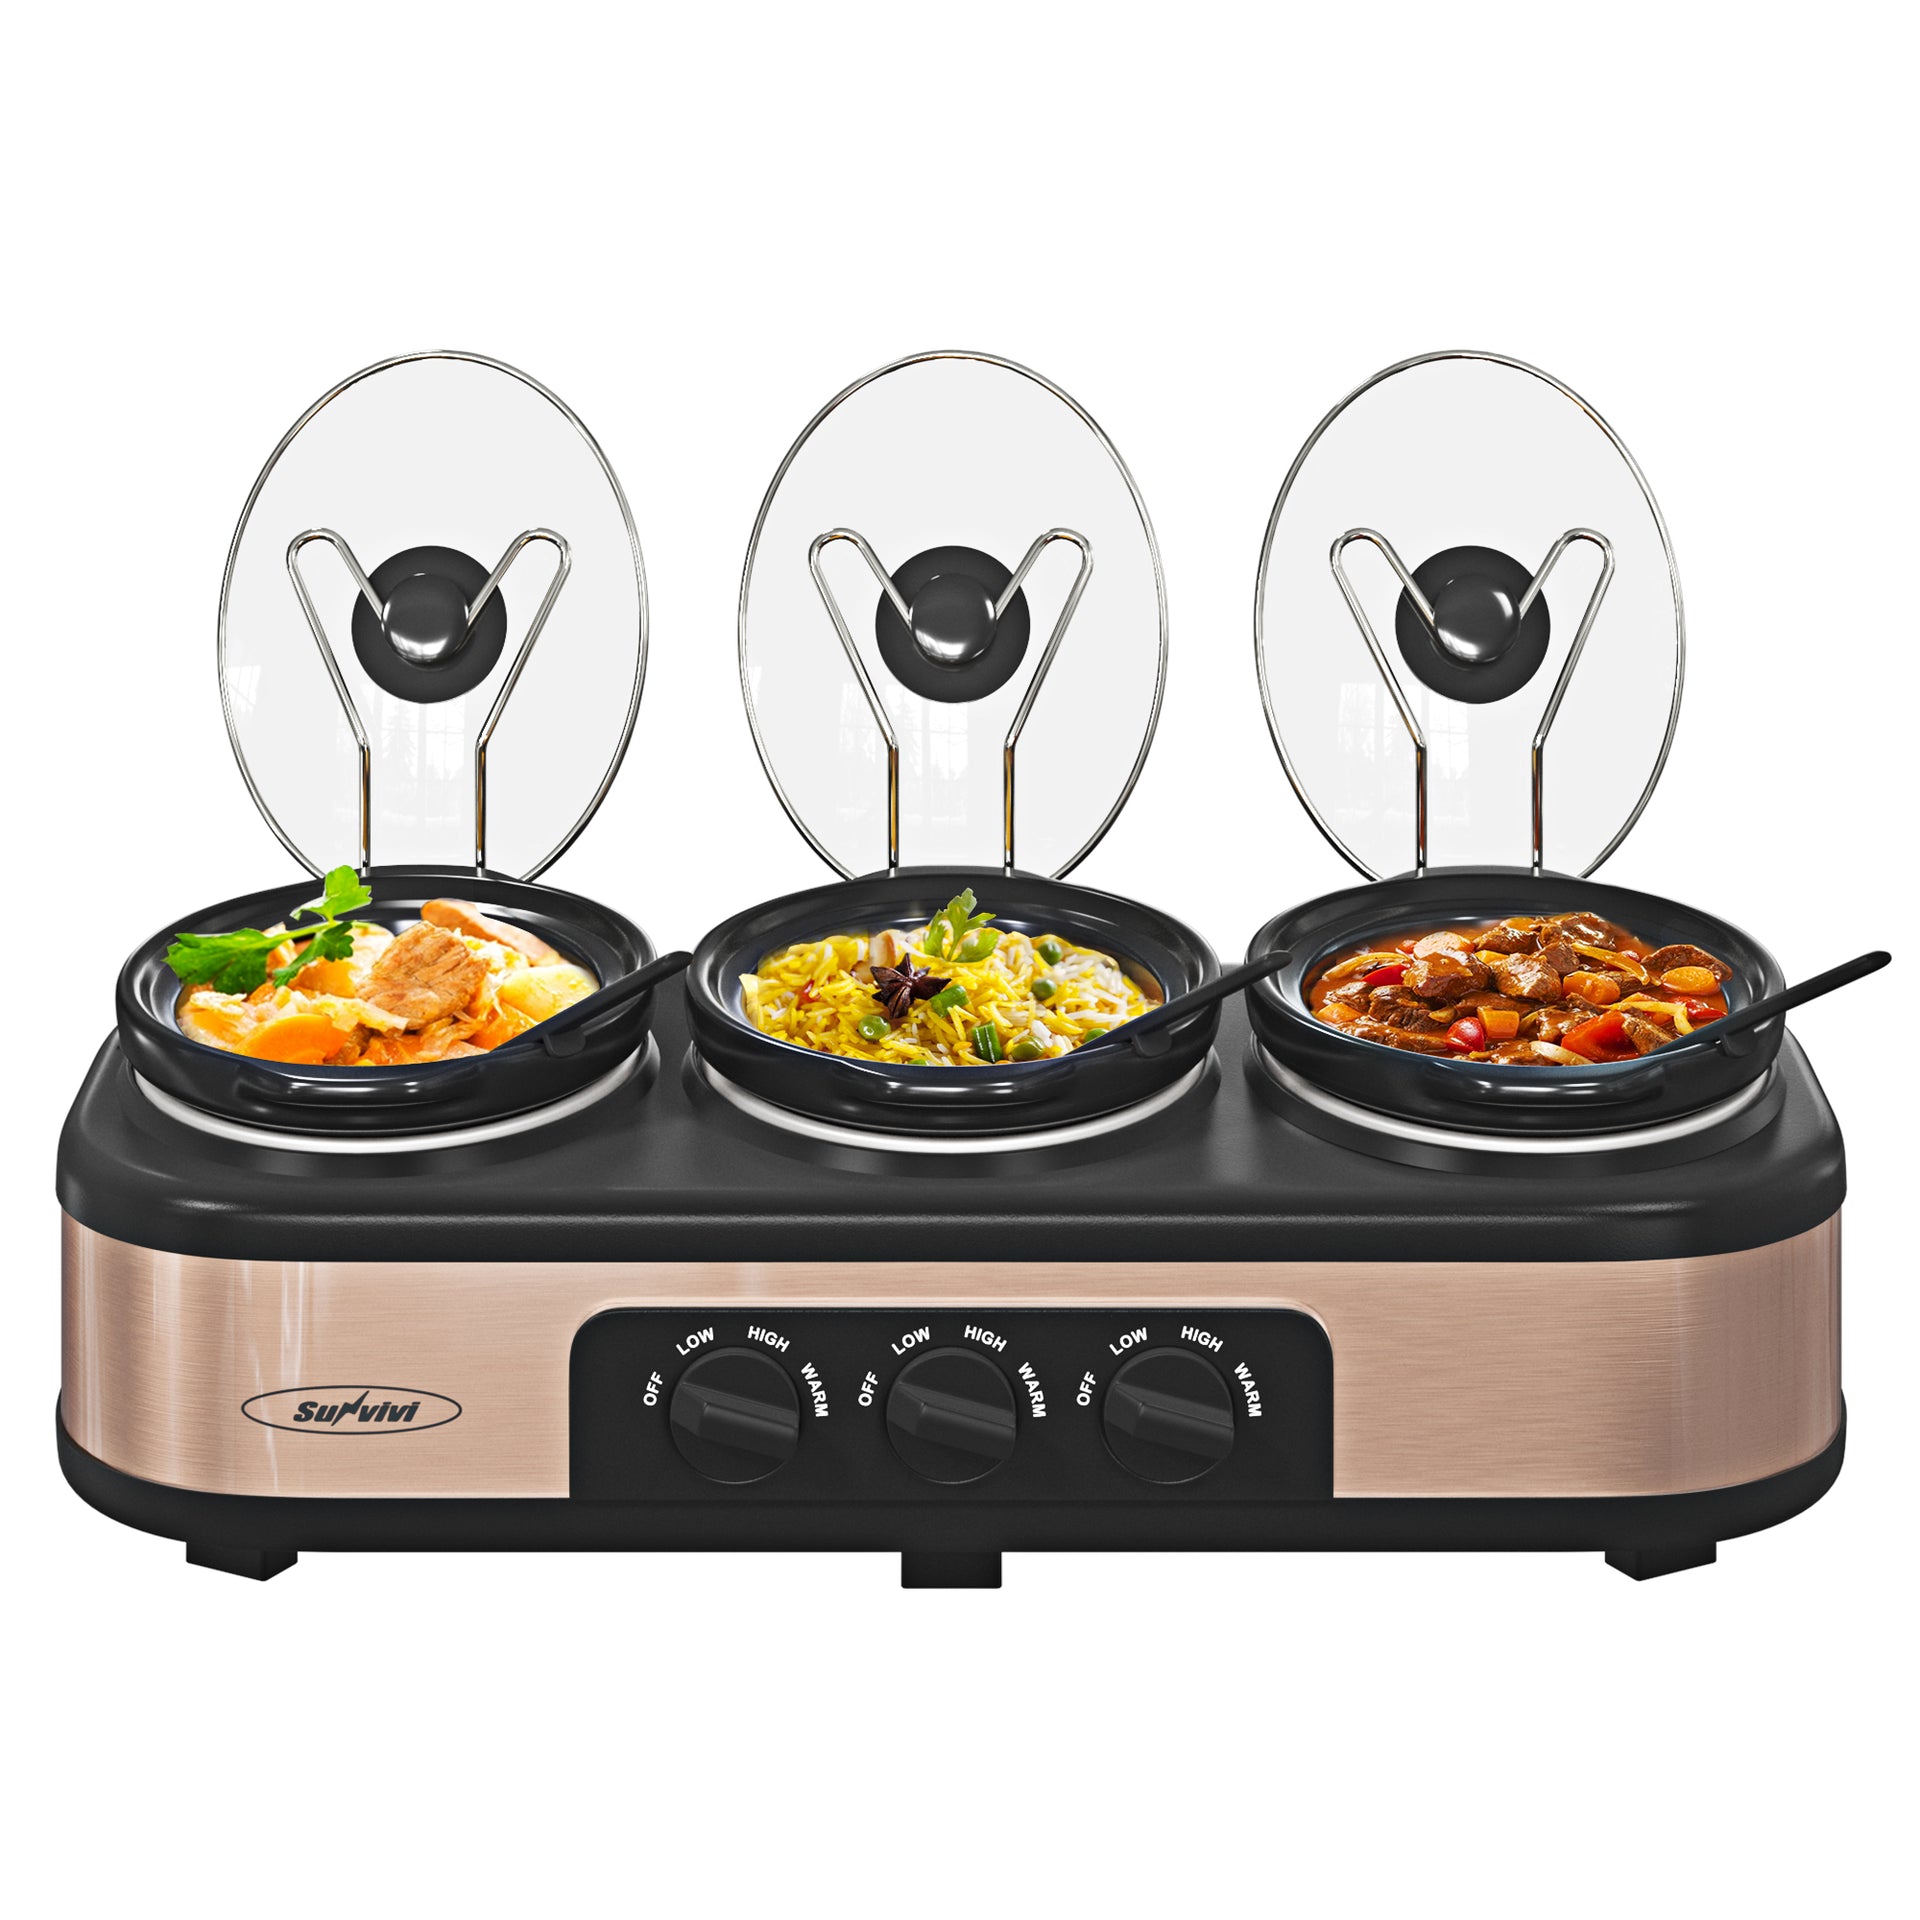 Double Slow Cooker,2 Pot Small Mini Crock Buffet Servers and